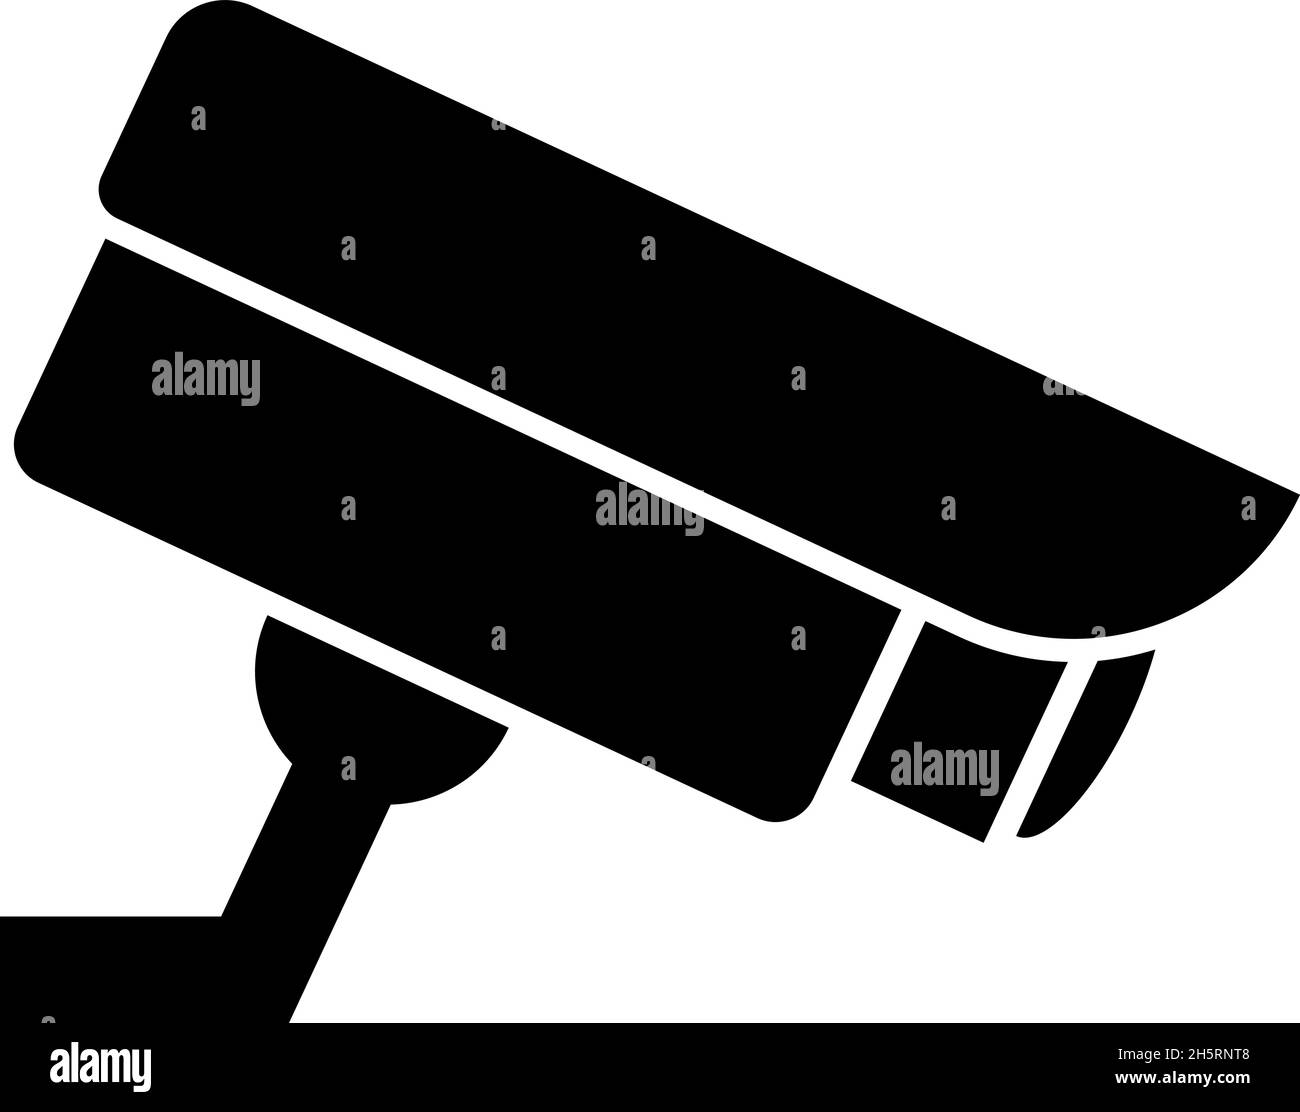 Surveillance camera icon vector. Security concept isilated flat illustration Stock Vector